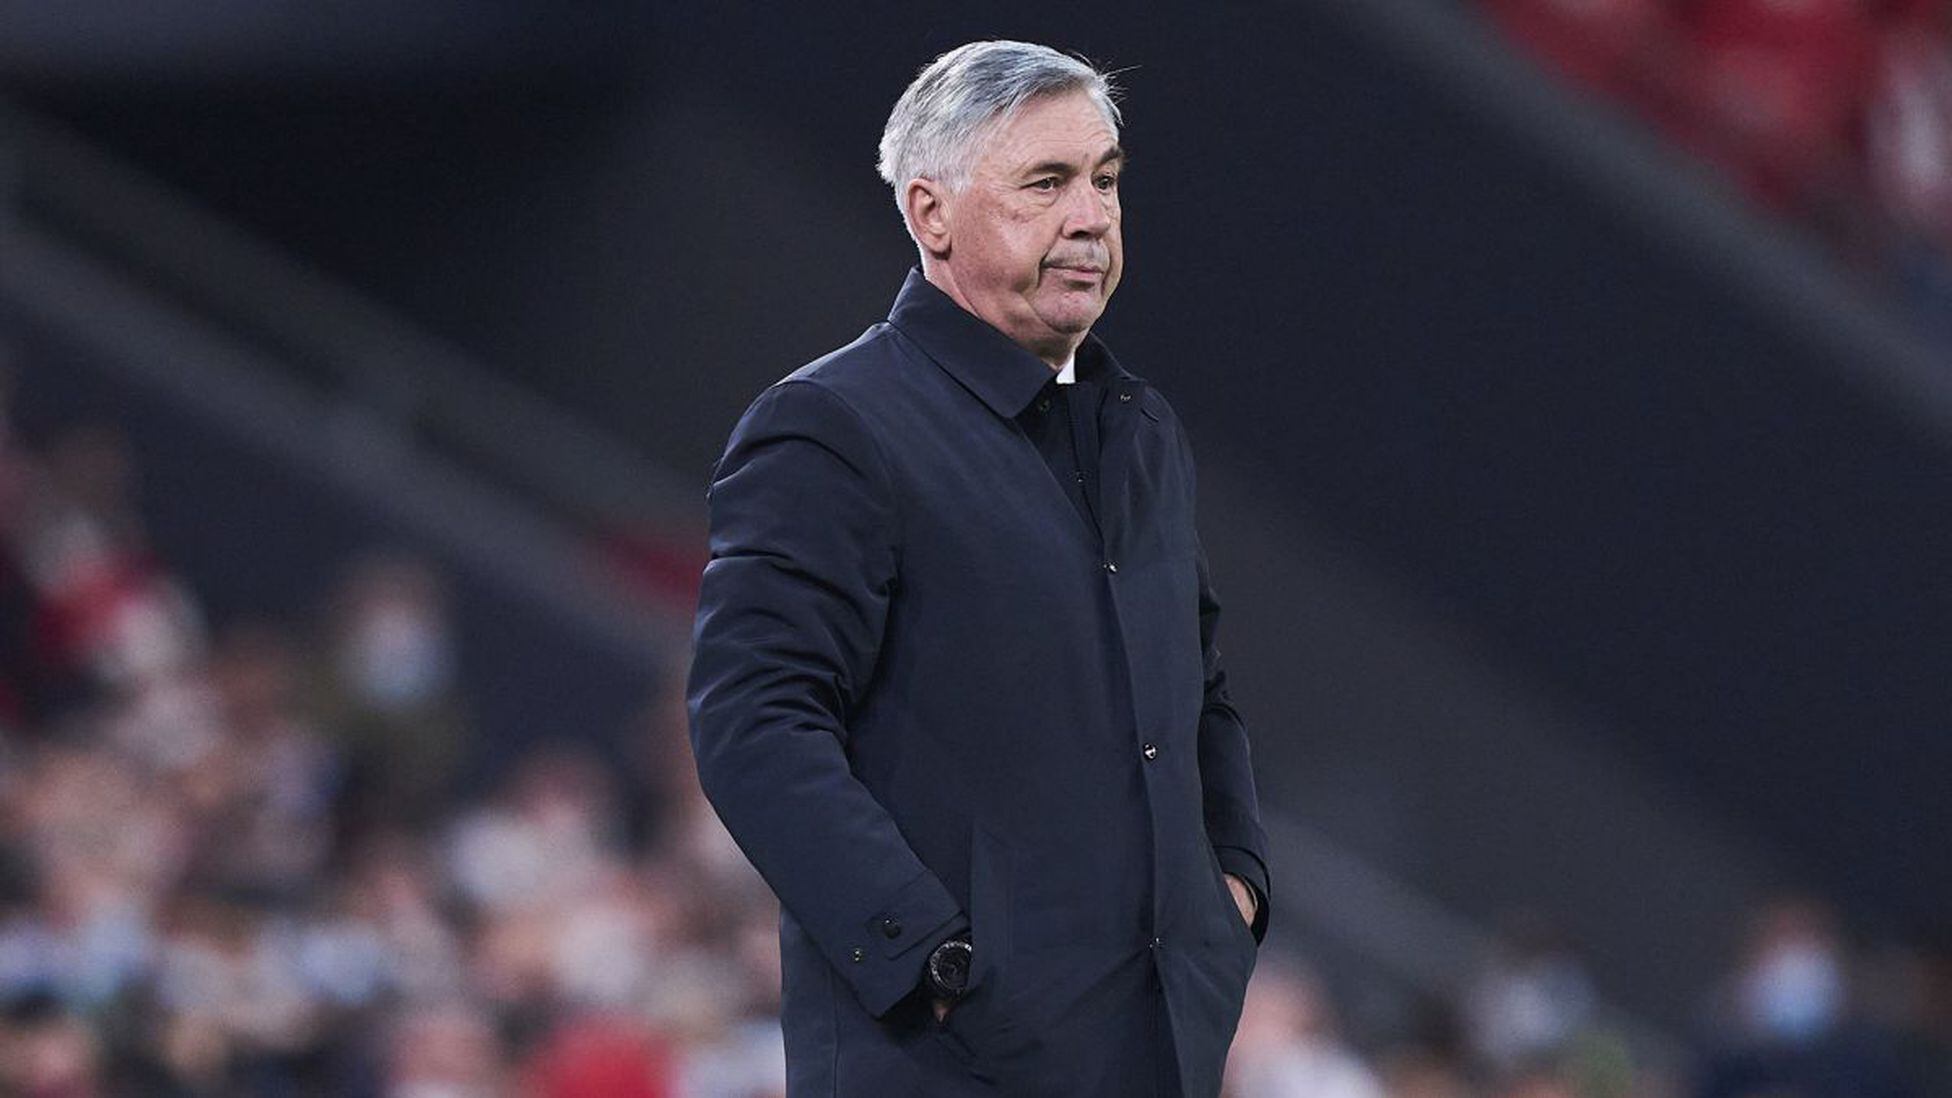 Has Carlo Ancelotti overlooked squad rotation at Real Madrid? - AS USA